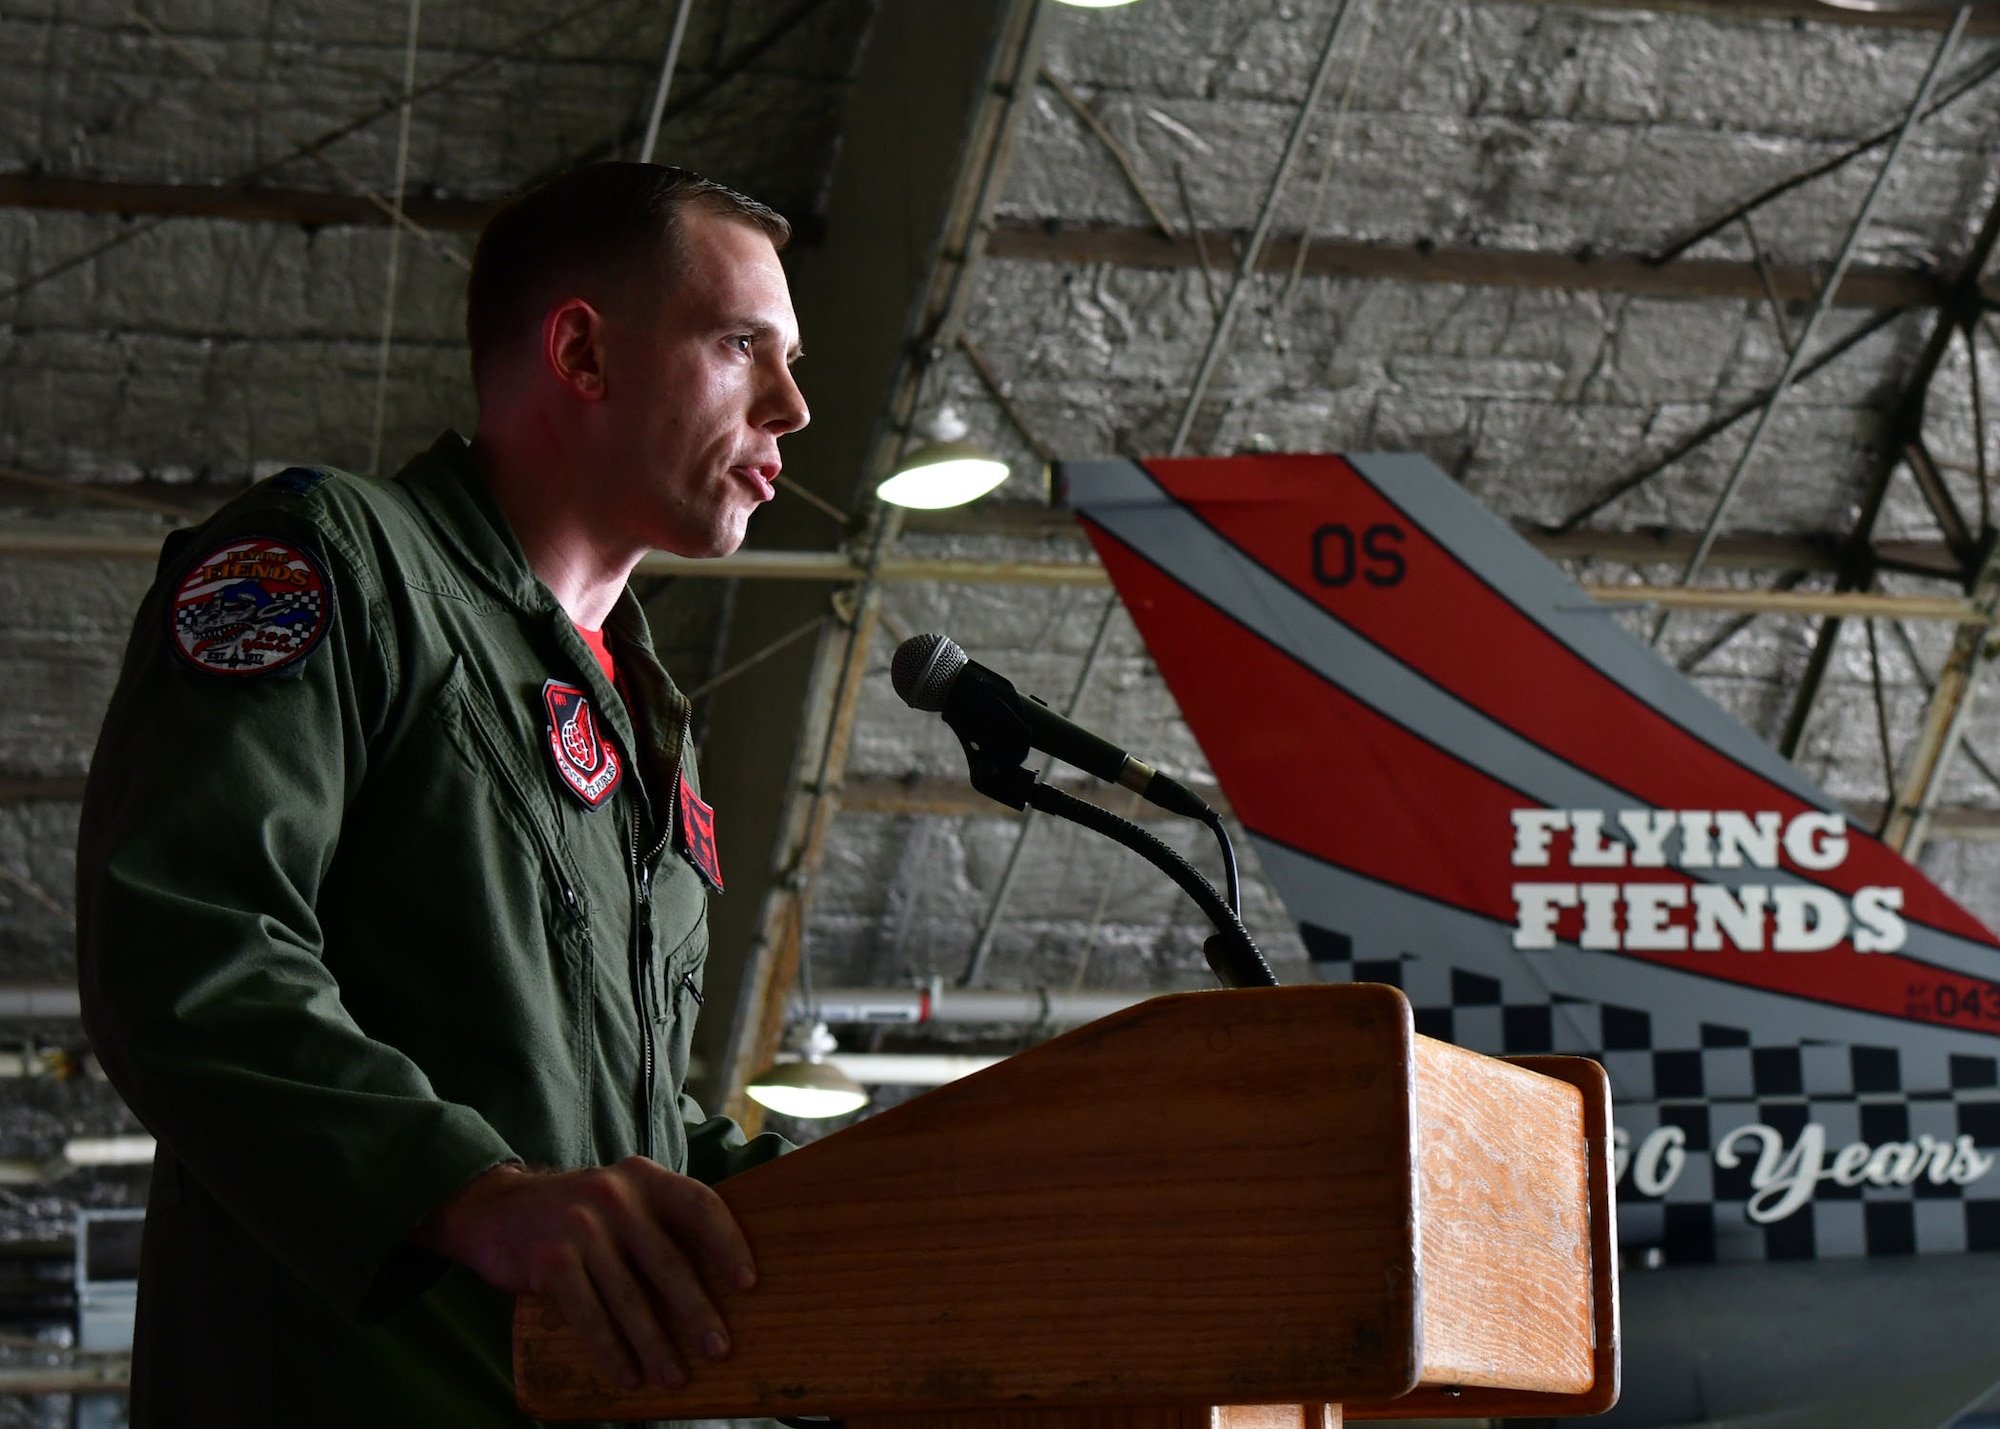 U.S. Air Force Capt. Wayne Mowery, 36th Fighter Squadron jet fighter pilot, speaks about the history of the 36th FS during a Tail Flash ceremony held July 21, 2017.Members from the 51st Maintenance Squadron Corrosion Control Shop painted the tail flash of an F-16 Fighting Falcon, which was unveiled during the ceremony in honor of the 36th FS’s 100 years of service to the U.S. Air Force. (U.S. Air Force photo by Senior Airman Franklin R. Ramos/Released)